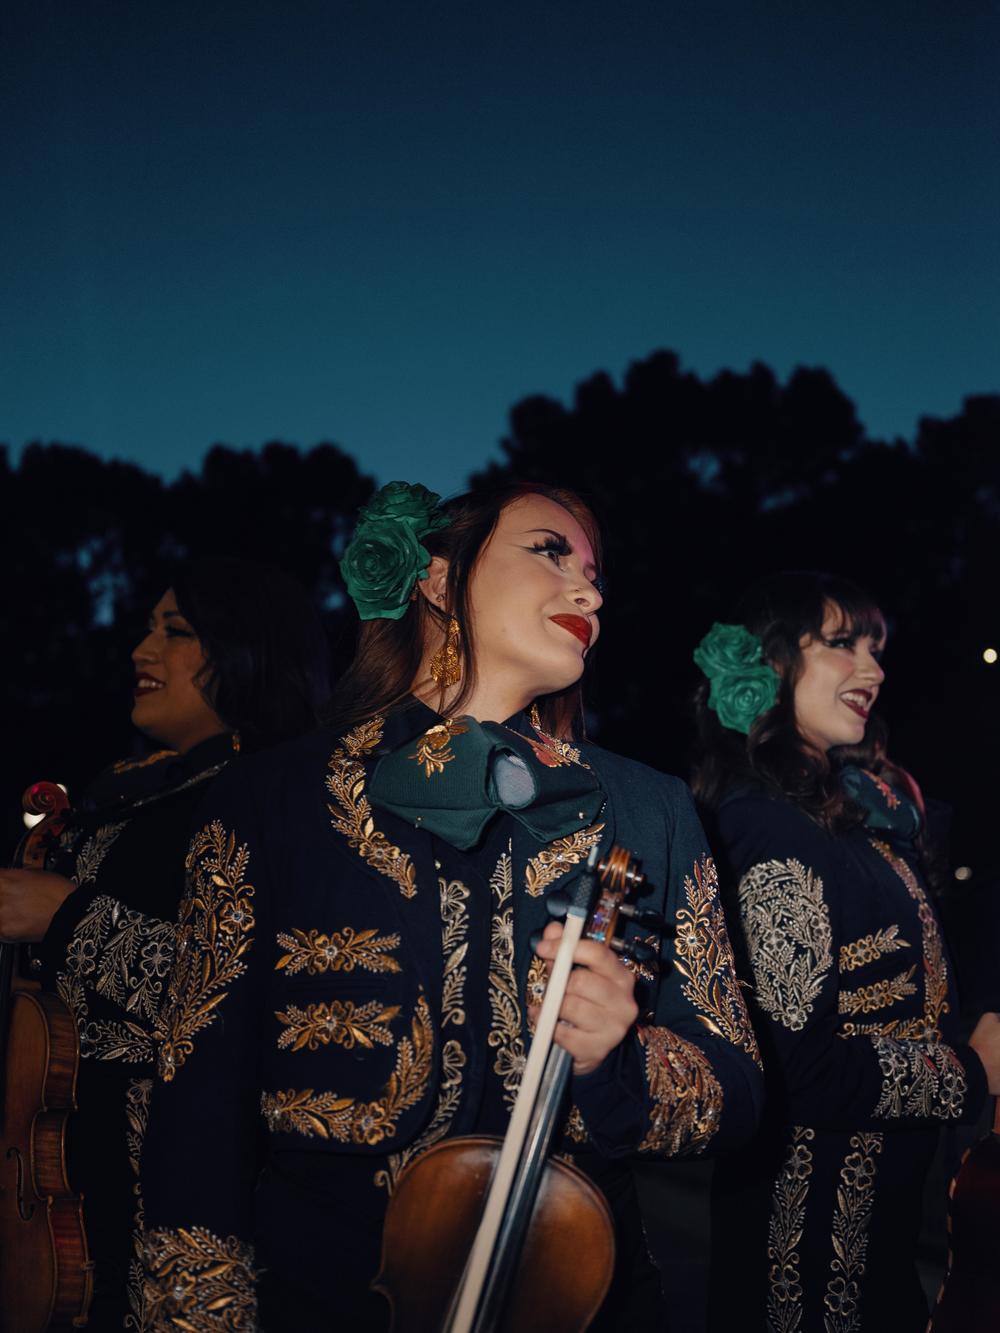 Three members of the Mariachi Divas group pose for a photo at the MARIACHI USA festival in June.